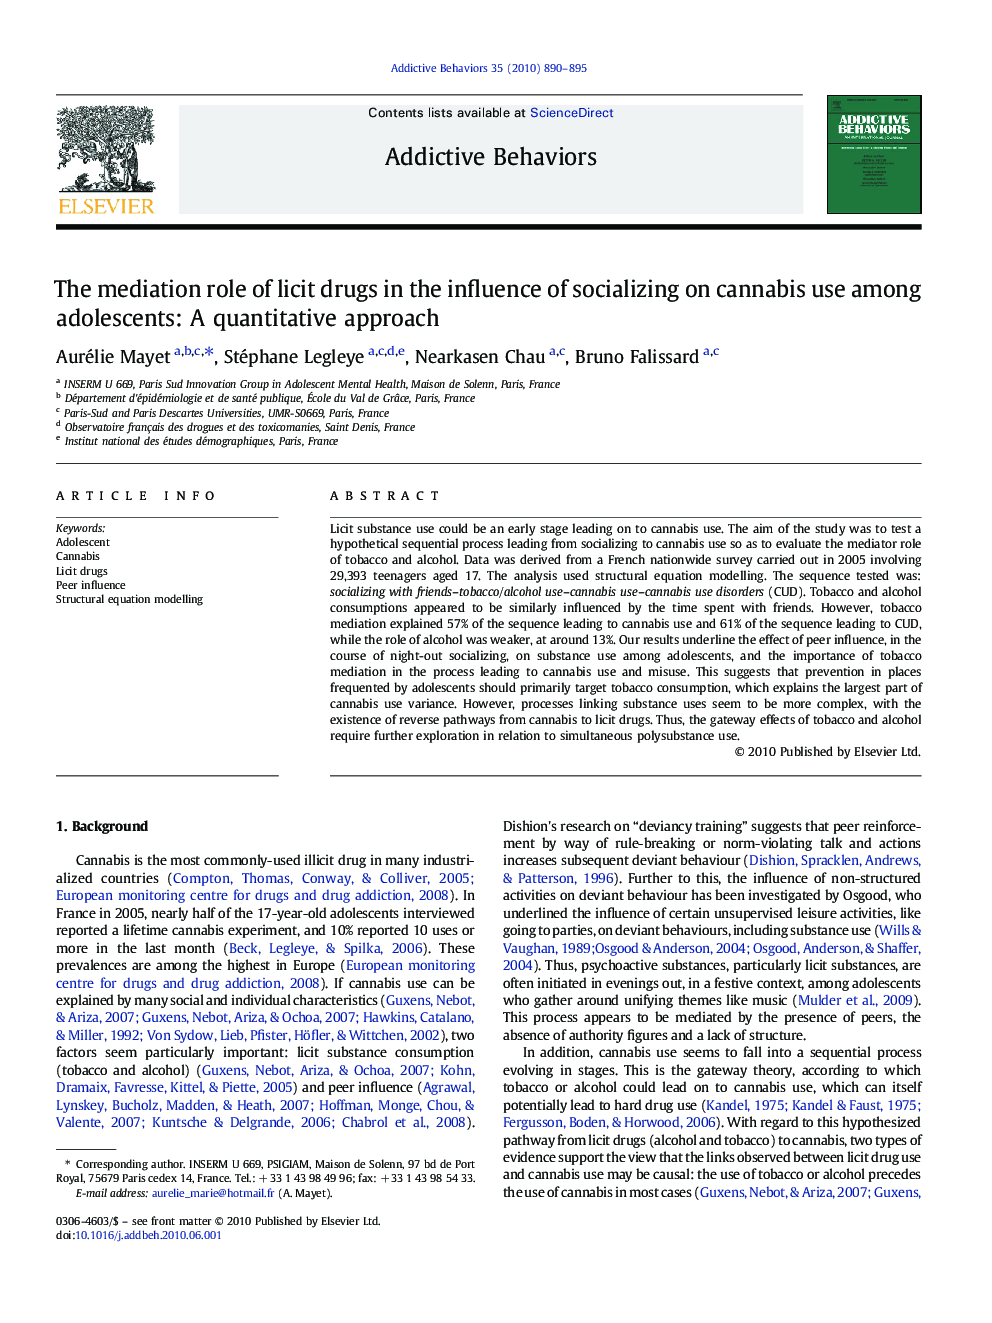 The mediation role of licit drugs in the influence of socializing on cannabis use among adolescents: A quantitative approach